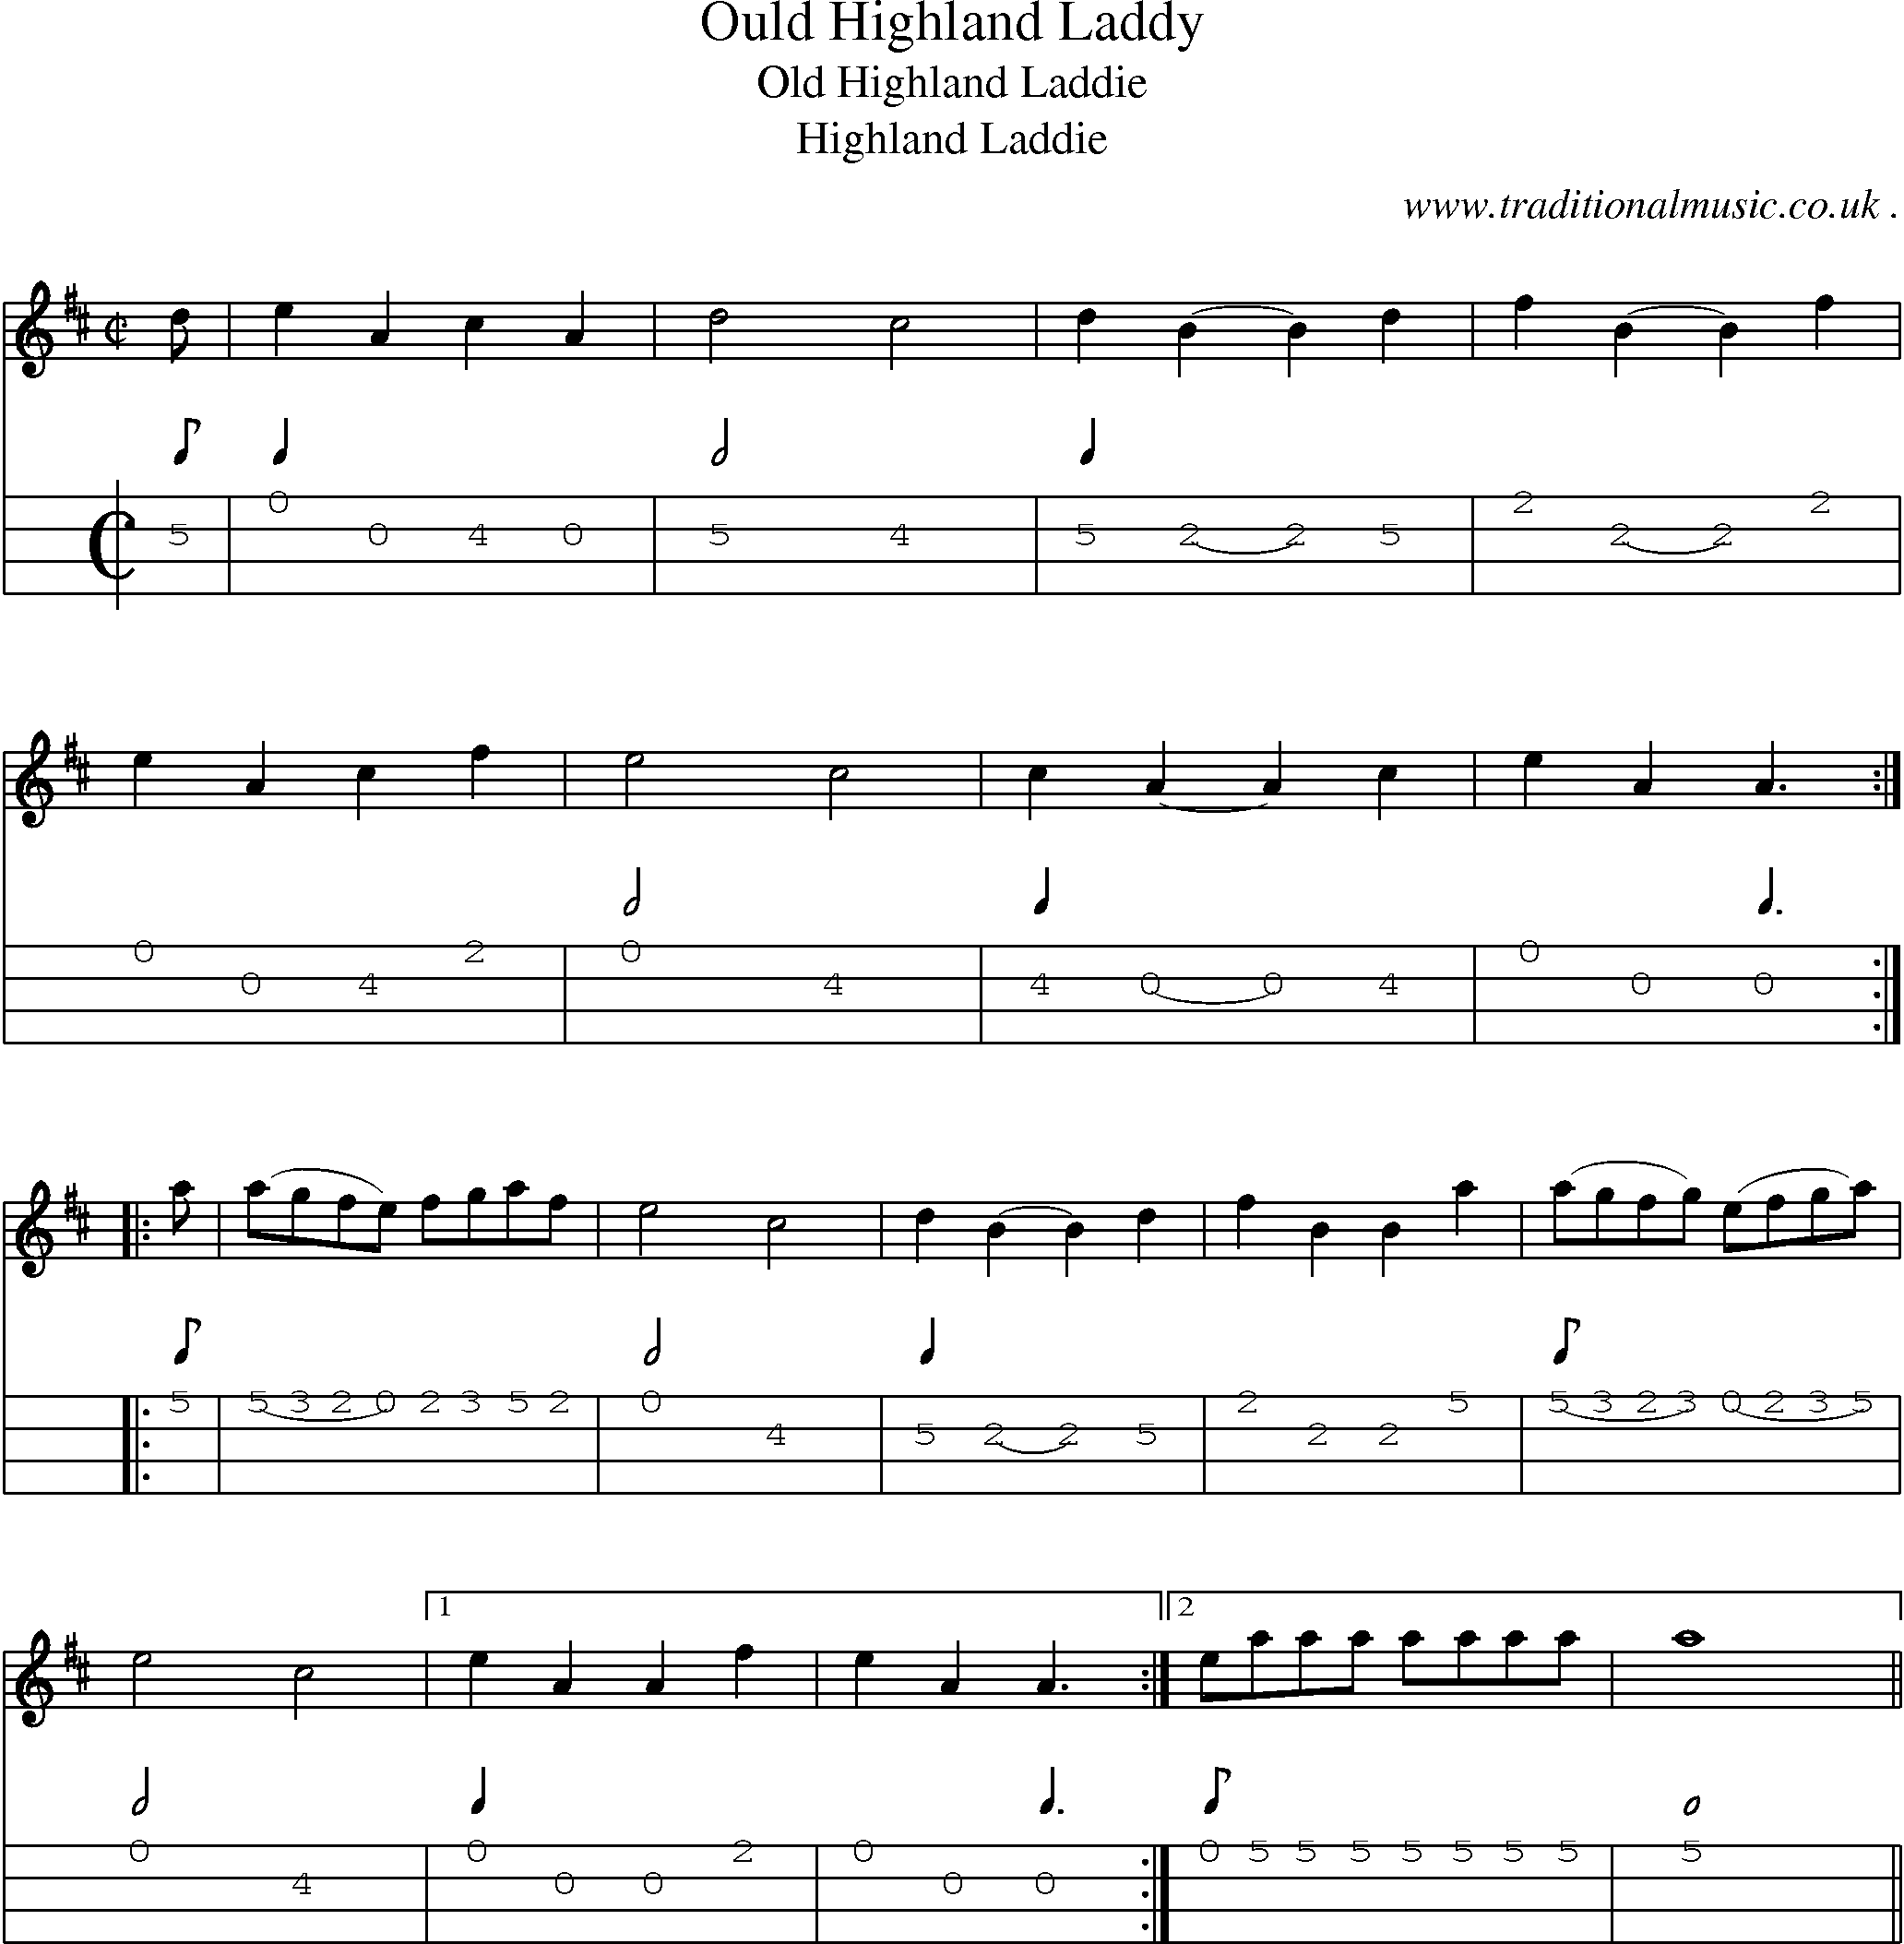 Sheet-Music and Mandolin Tabs for Ould Highland Laddy